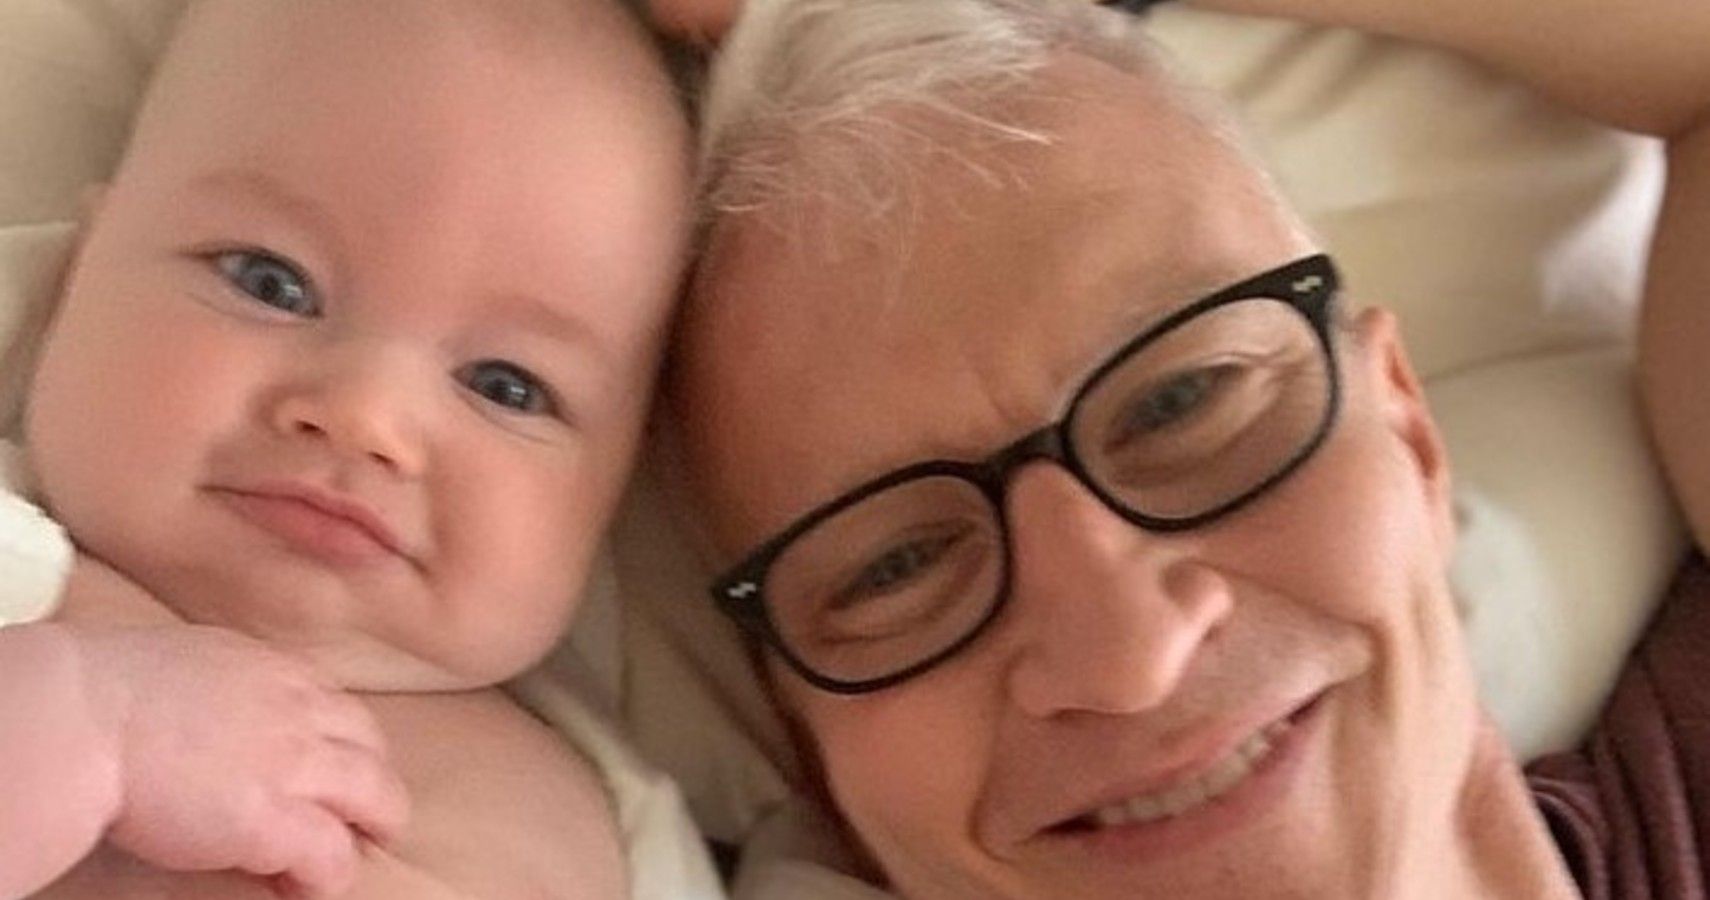 Anderson Cooper's 7-month-old baby boy makes surprise appearance on CNN special